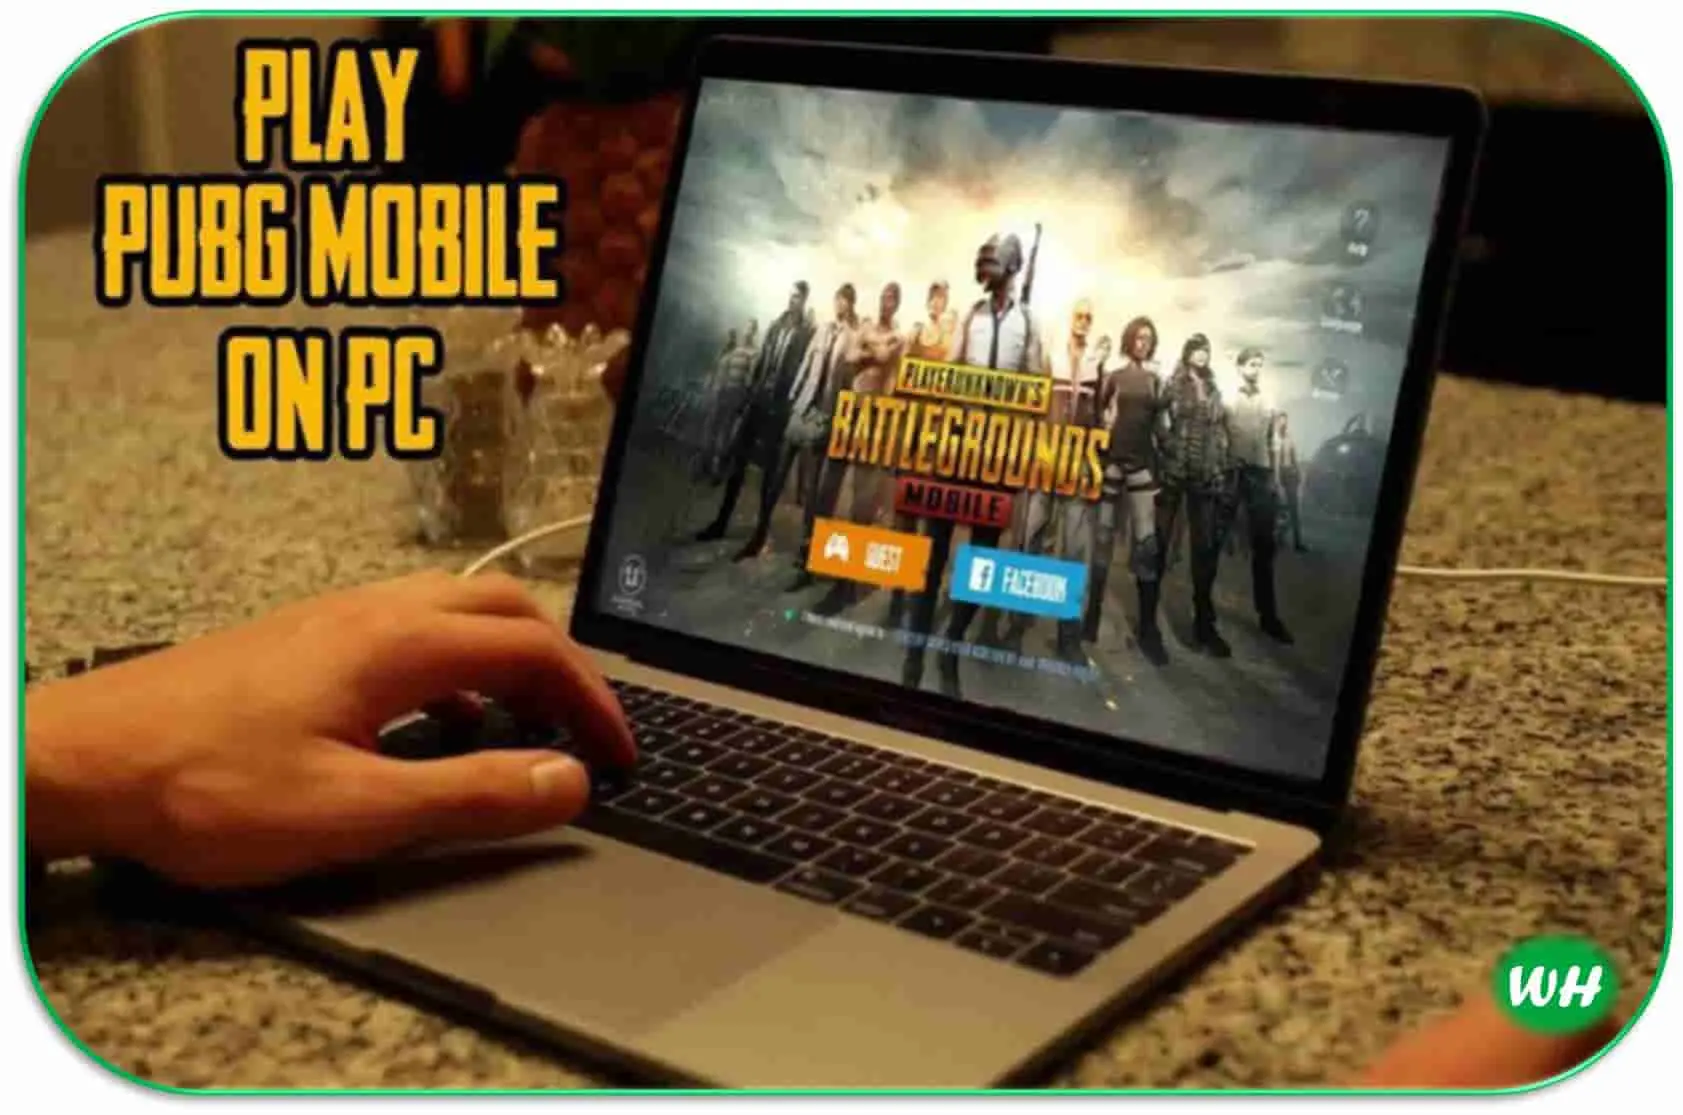 pubg pc download free full version with crack